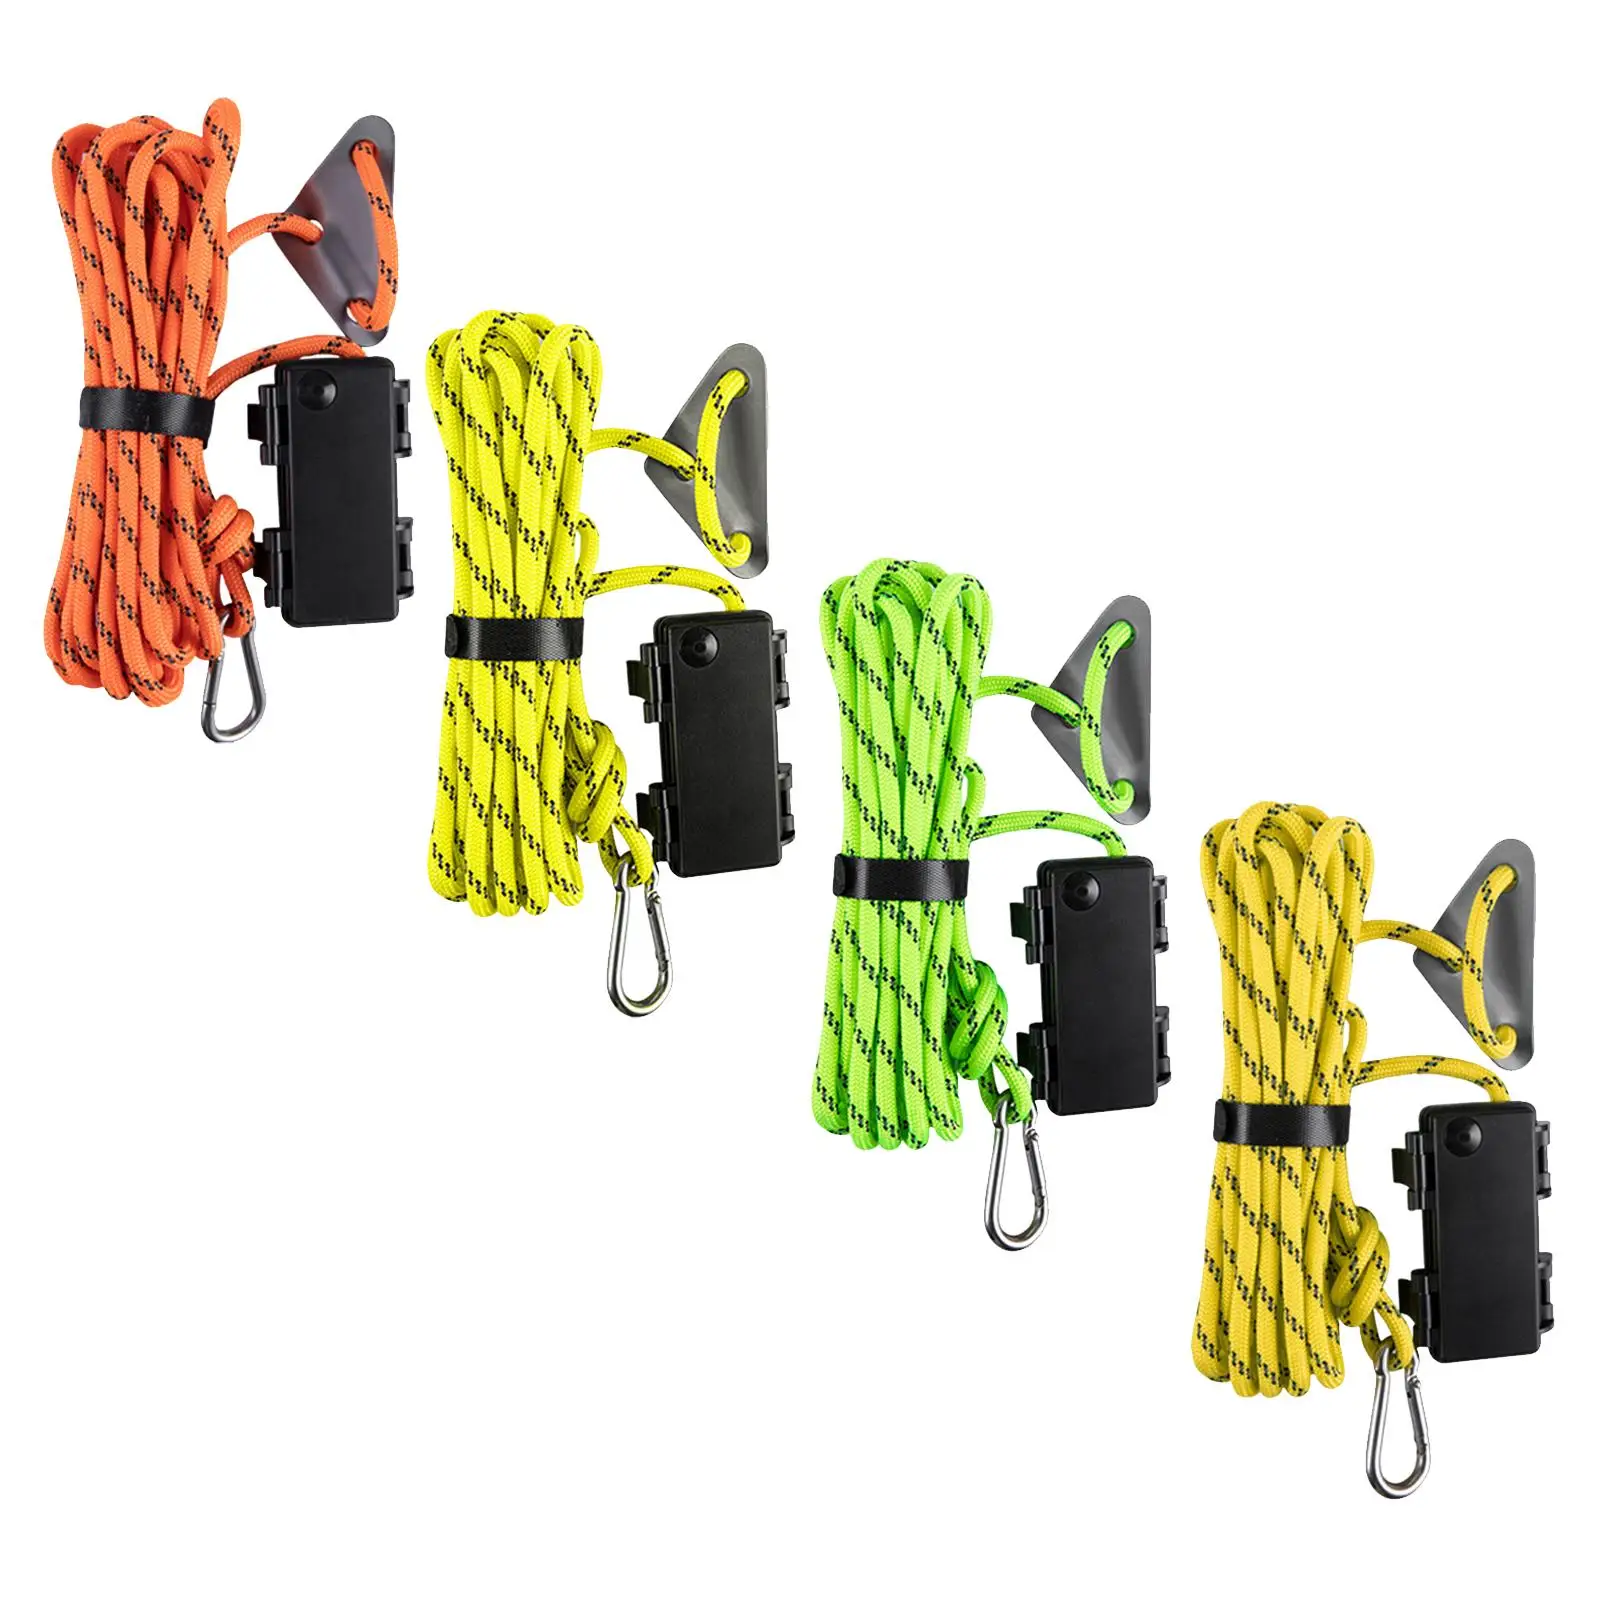 LED Tent Rope Guy Lines Lamp Lights Waterproof Tent Accessories Paracord Camping